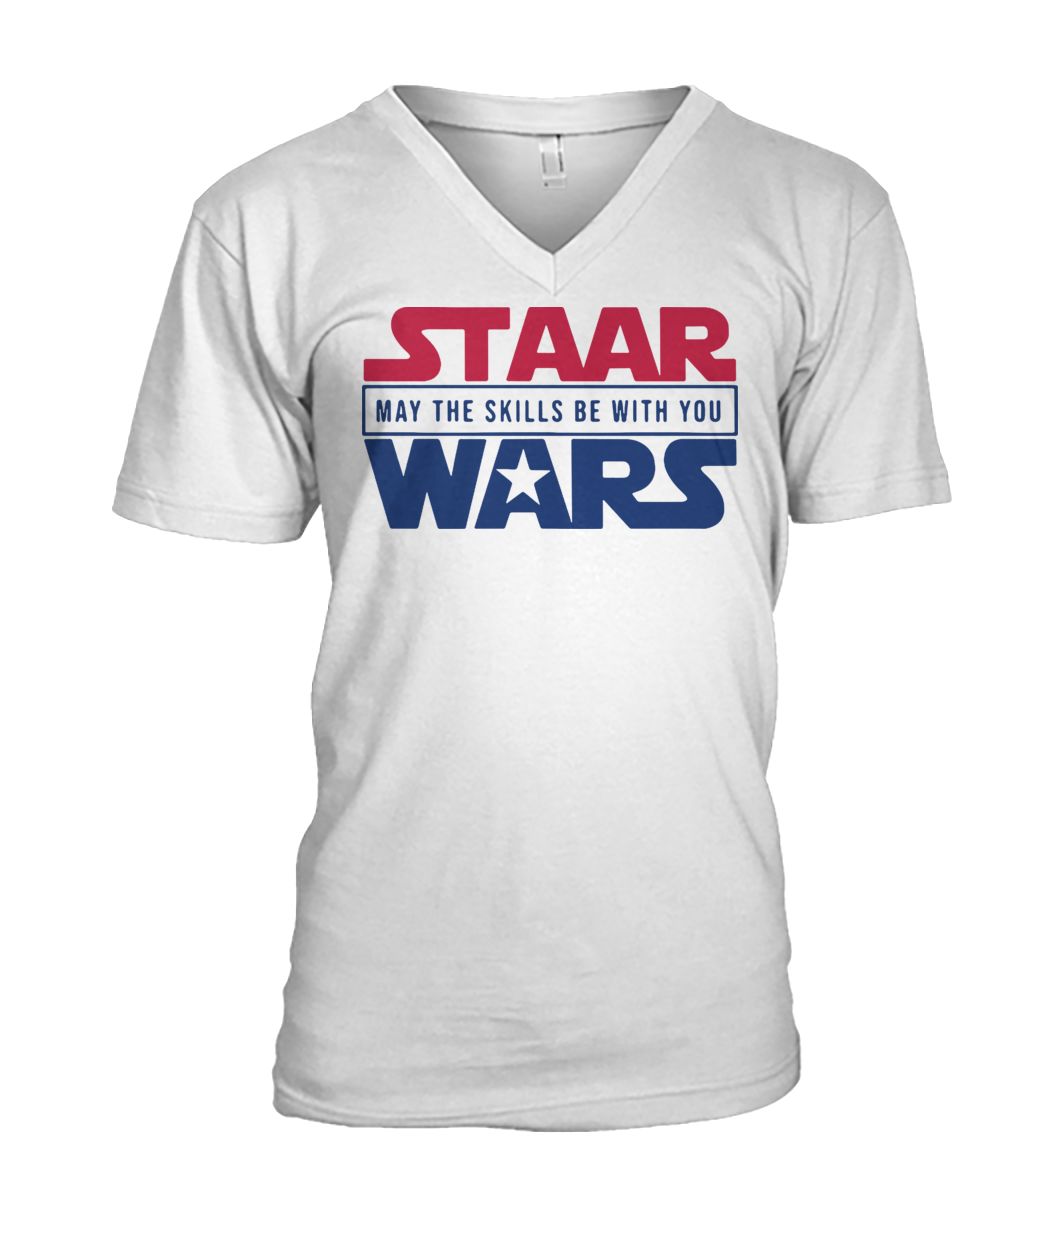 Staar Wars may the skills be with you mens v-neck